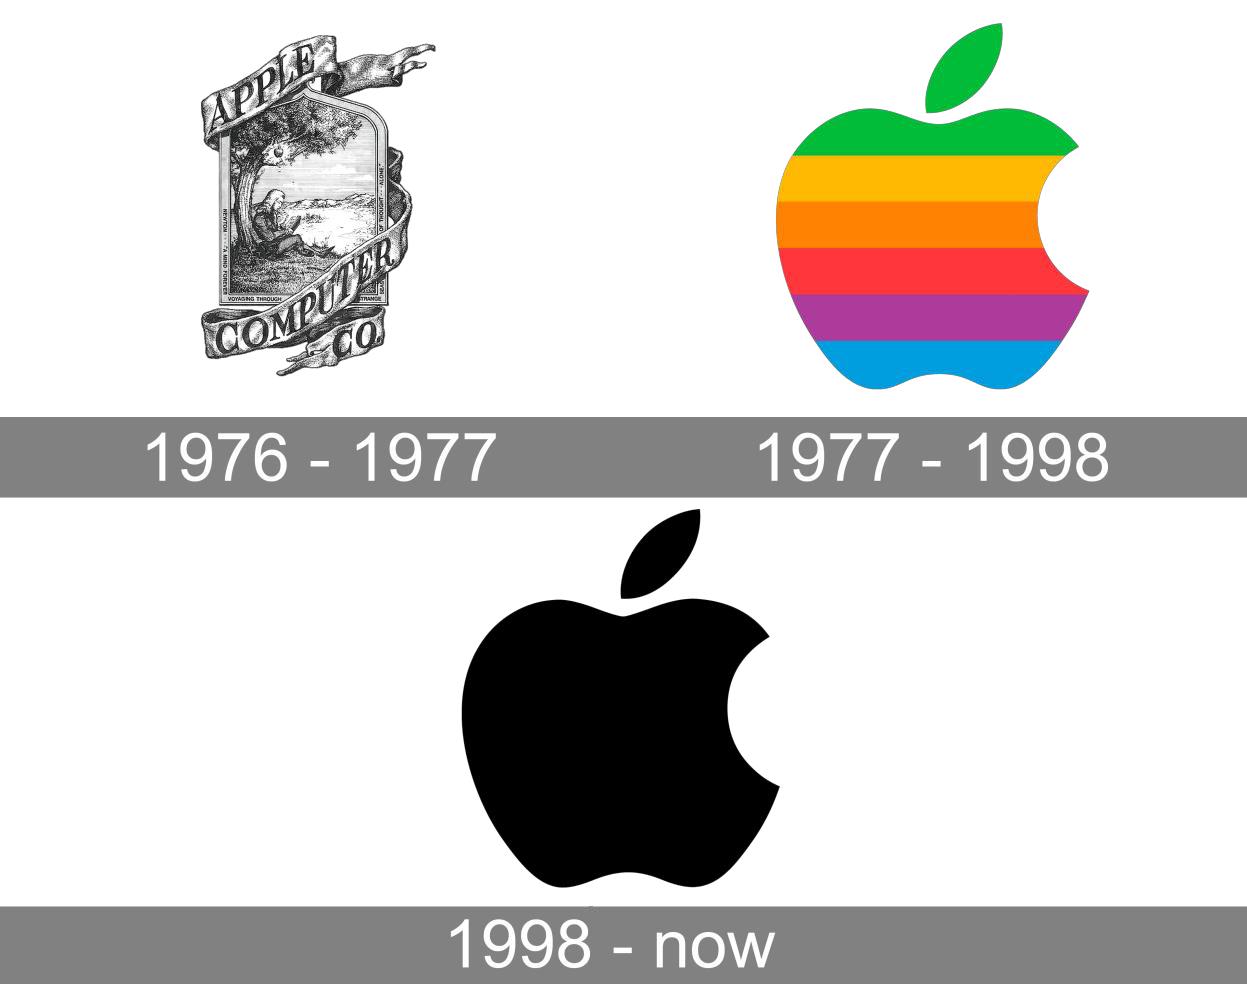 word-image-41329-11 20 Logos That Have Withstood The Test Of Time